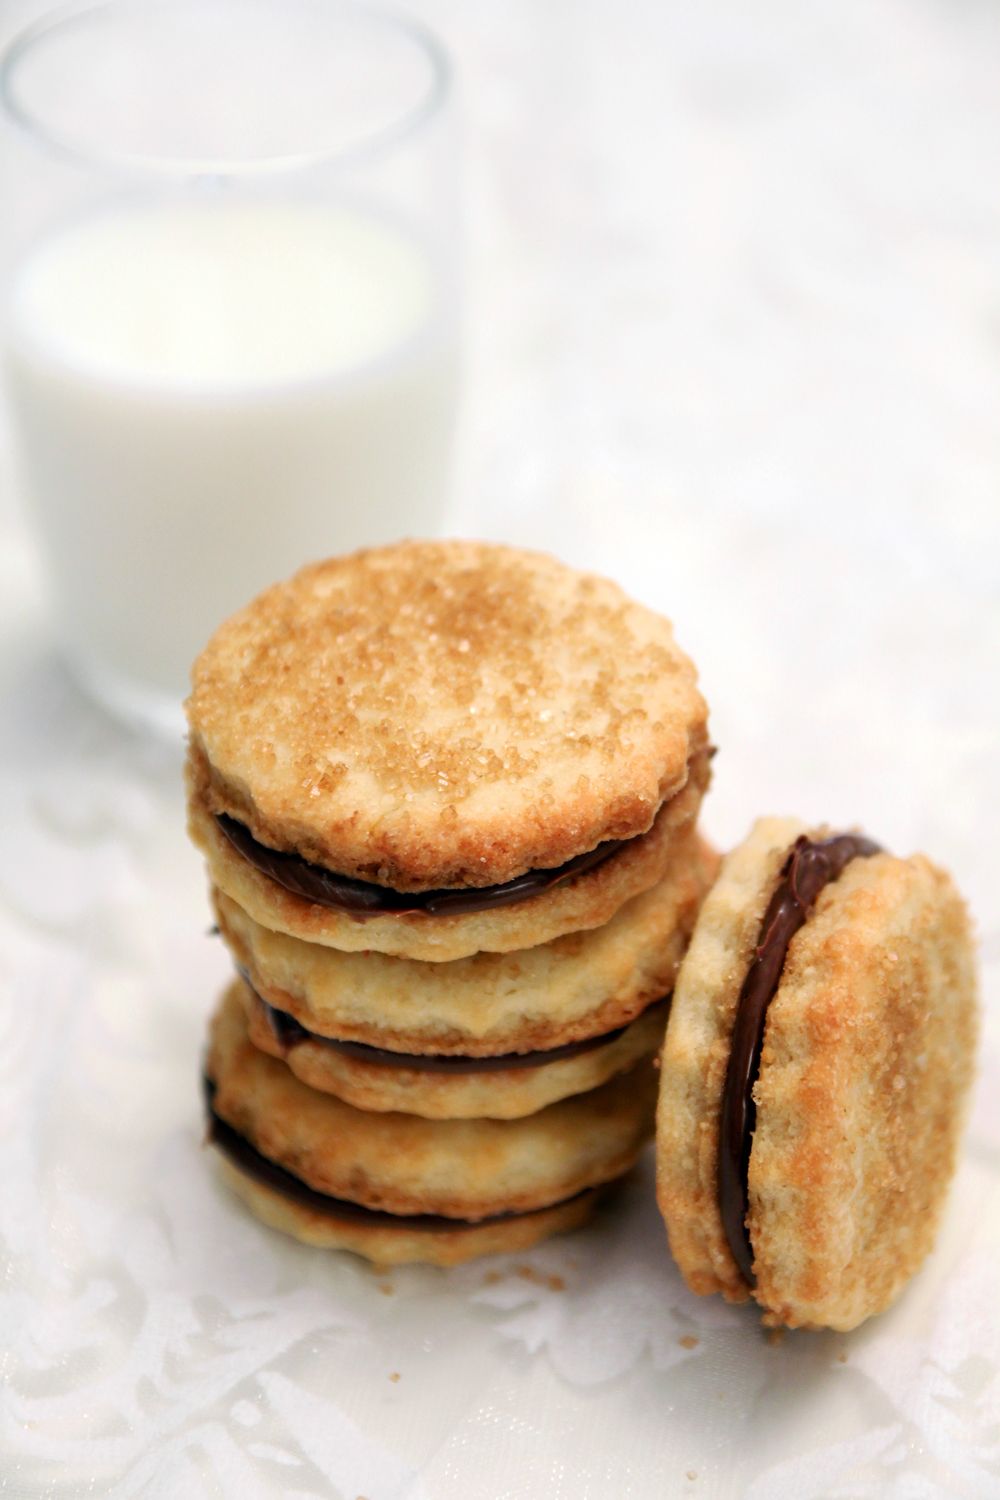 Almond Sandwich Cookies with Chocolate Filling